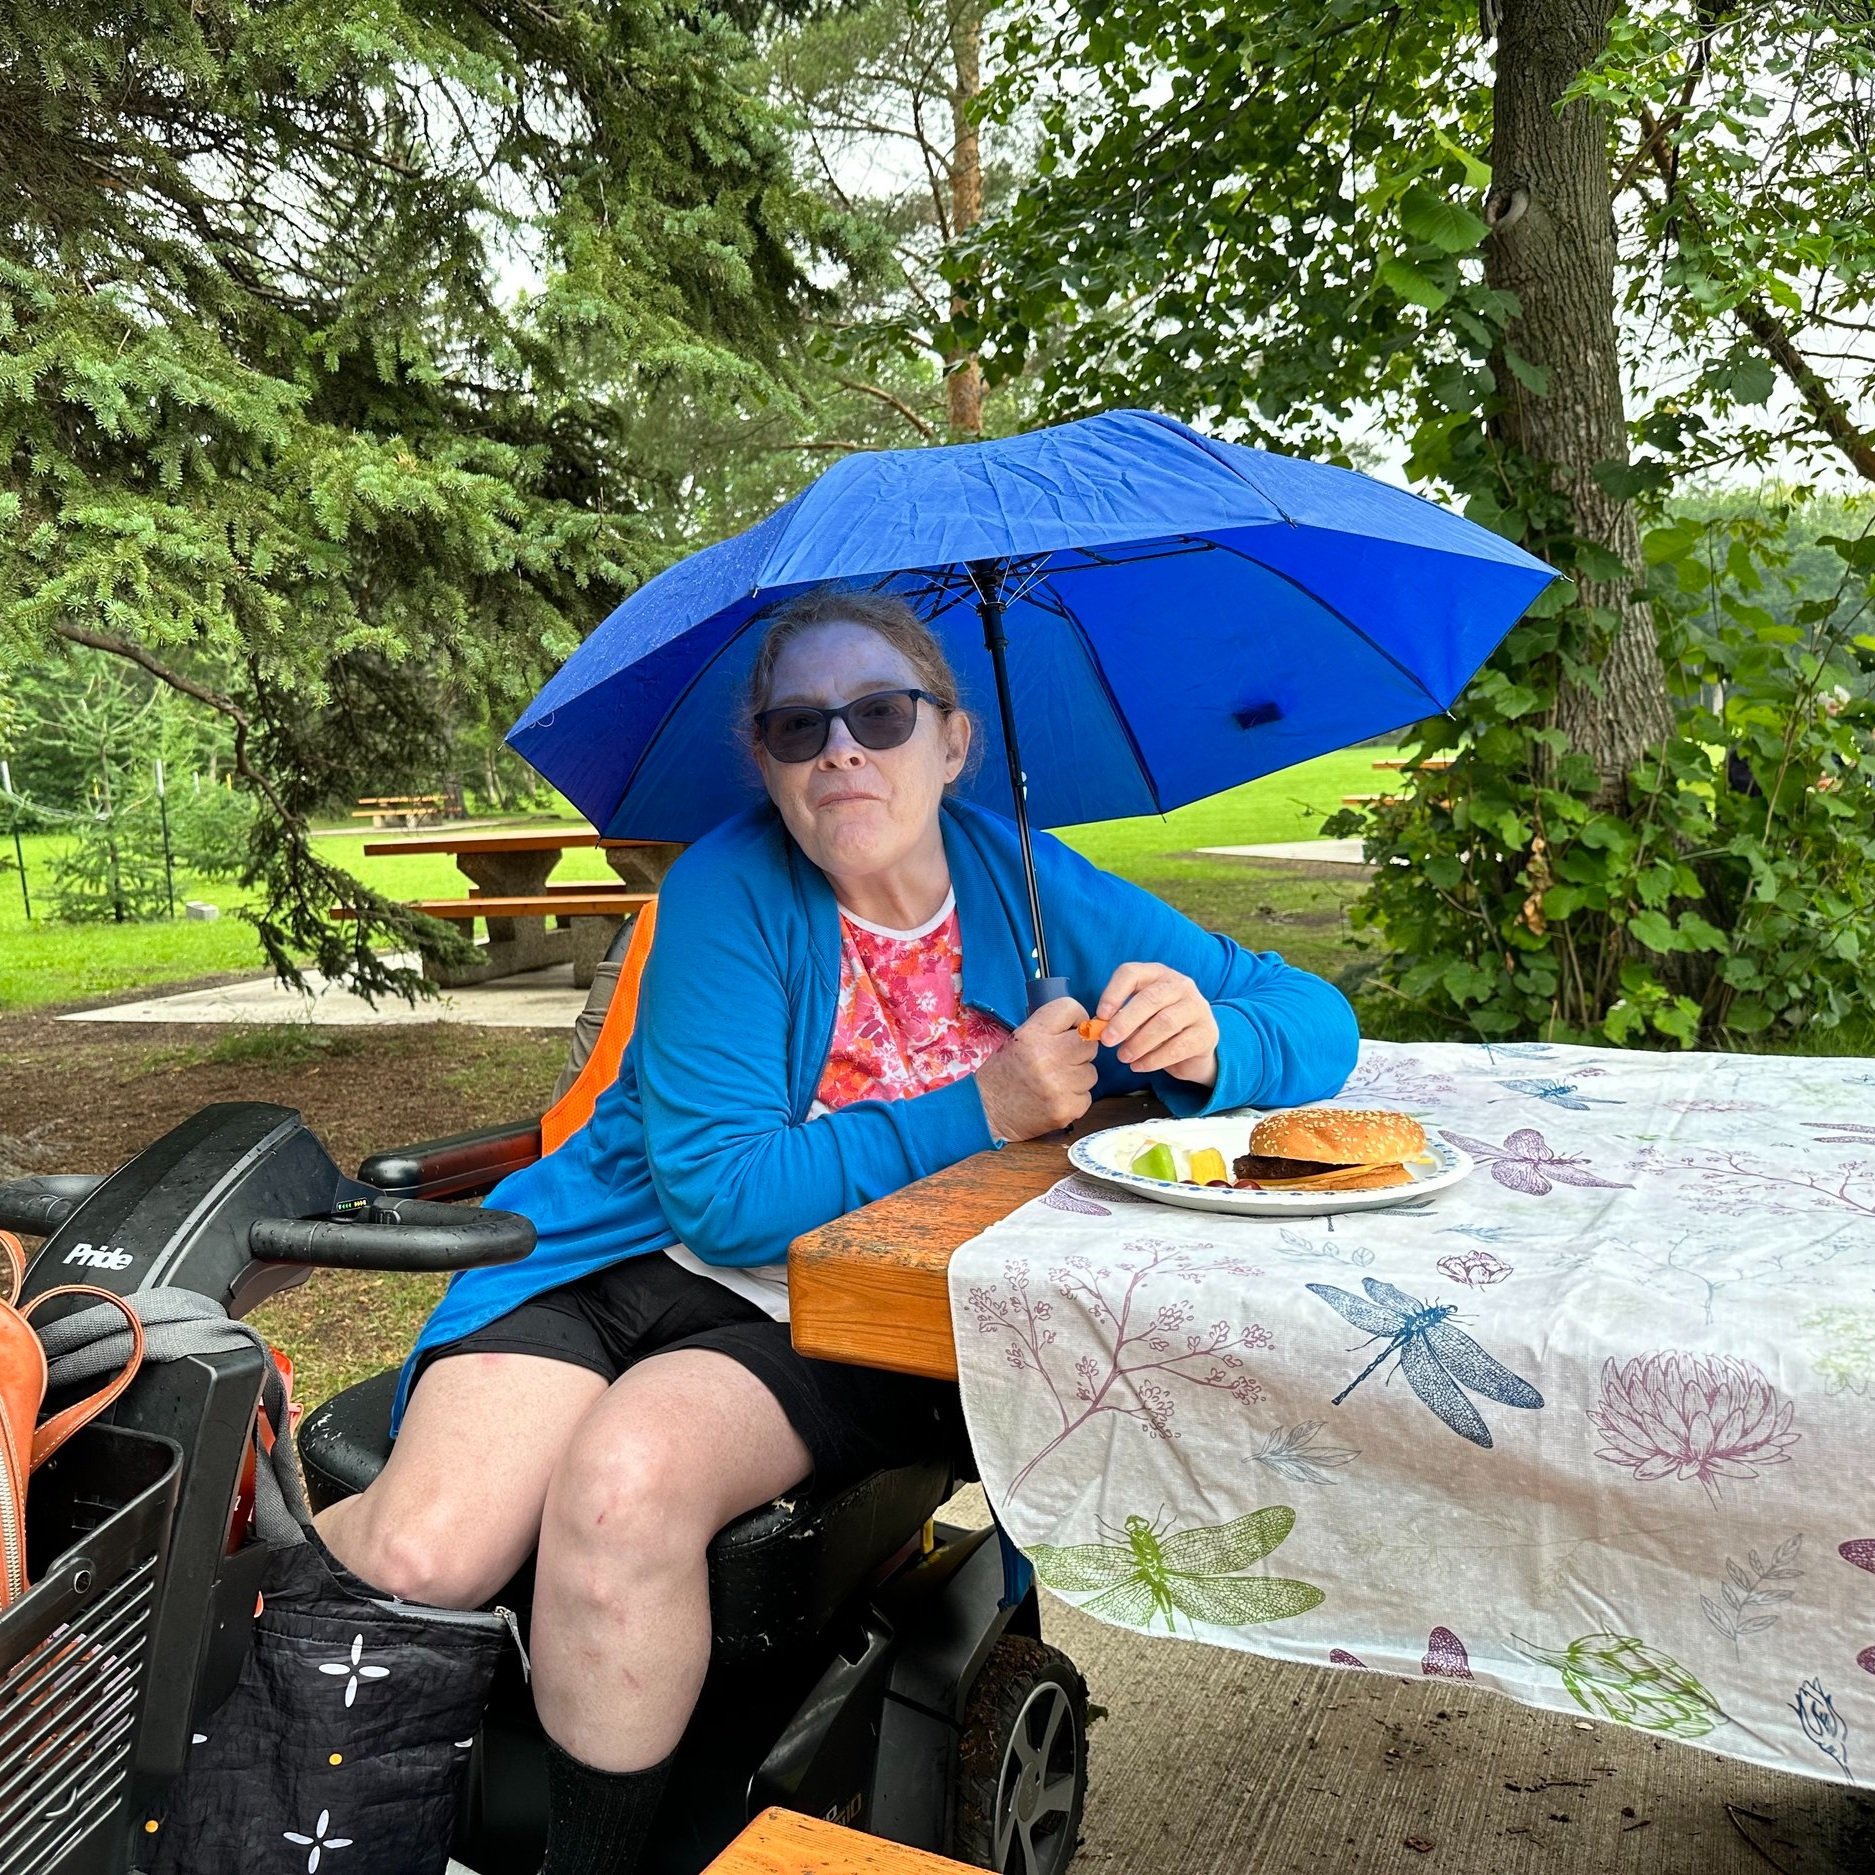  A women sits to the side of a picnic table in a scooter. She is wearing sunglasses, a blue jacket and is holding a blue umbrella. A plate of food is on the table next to her.  